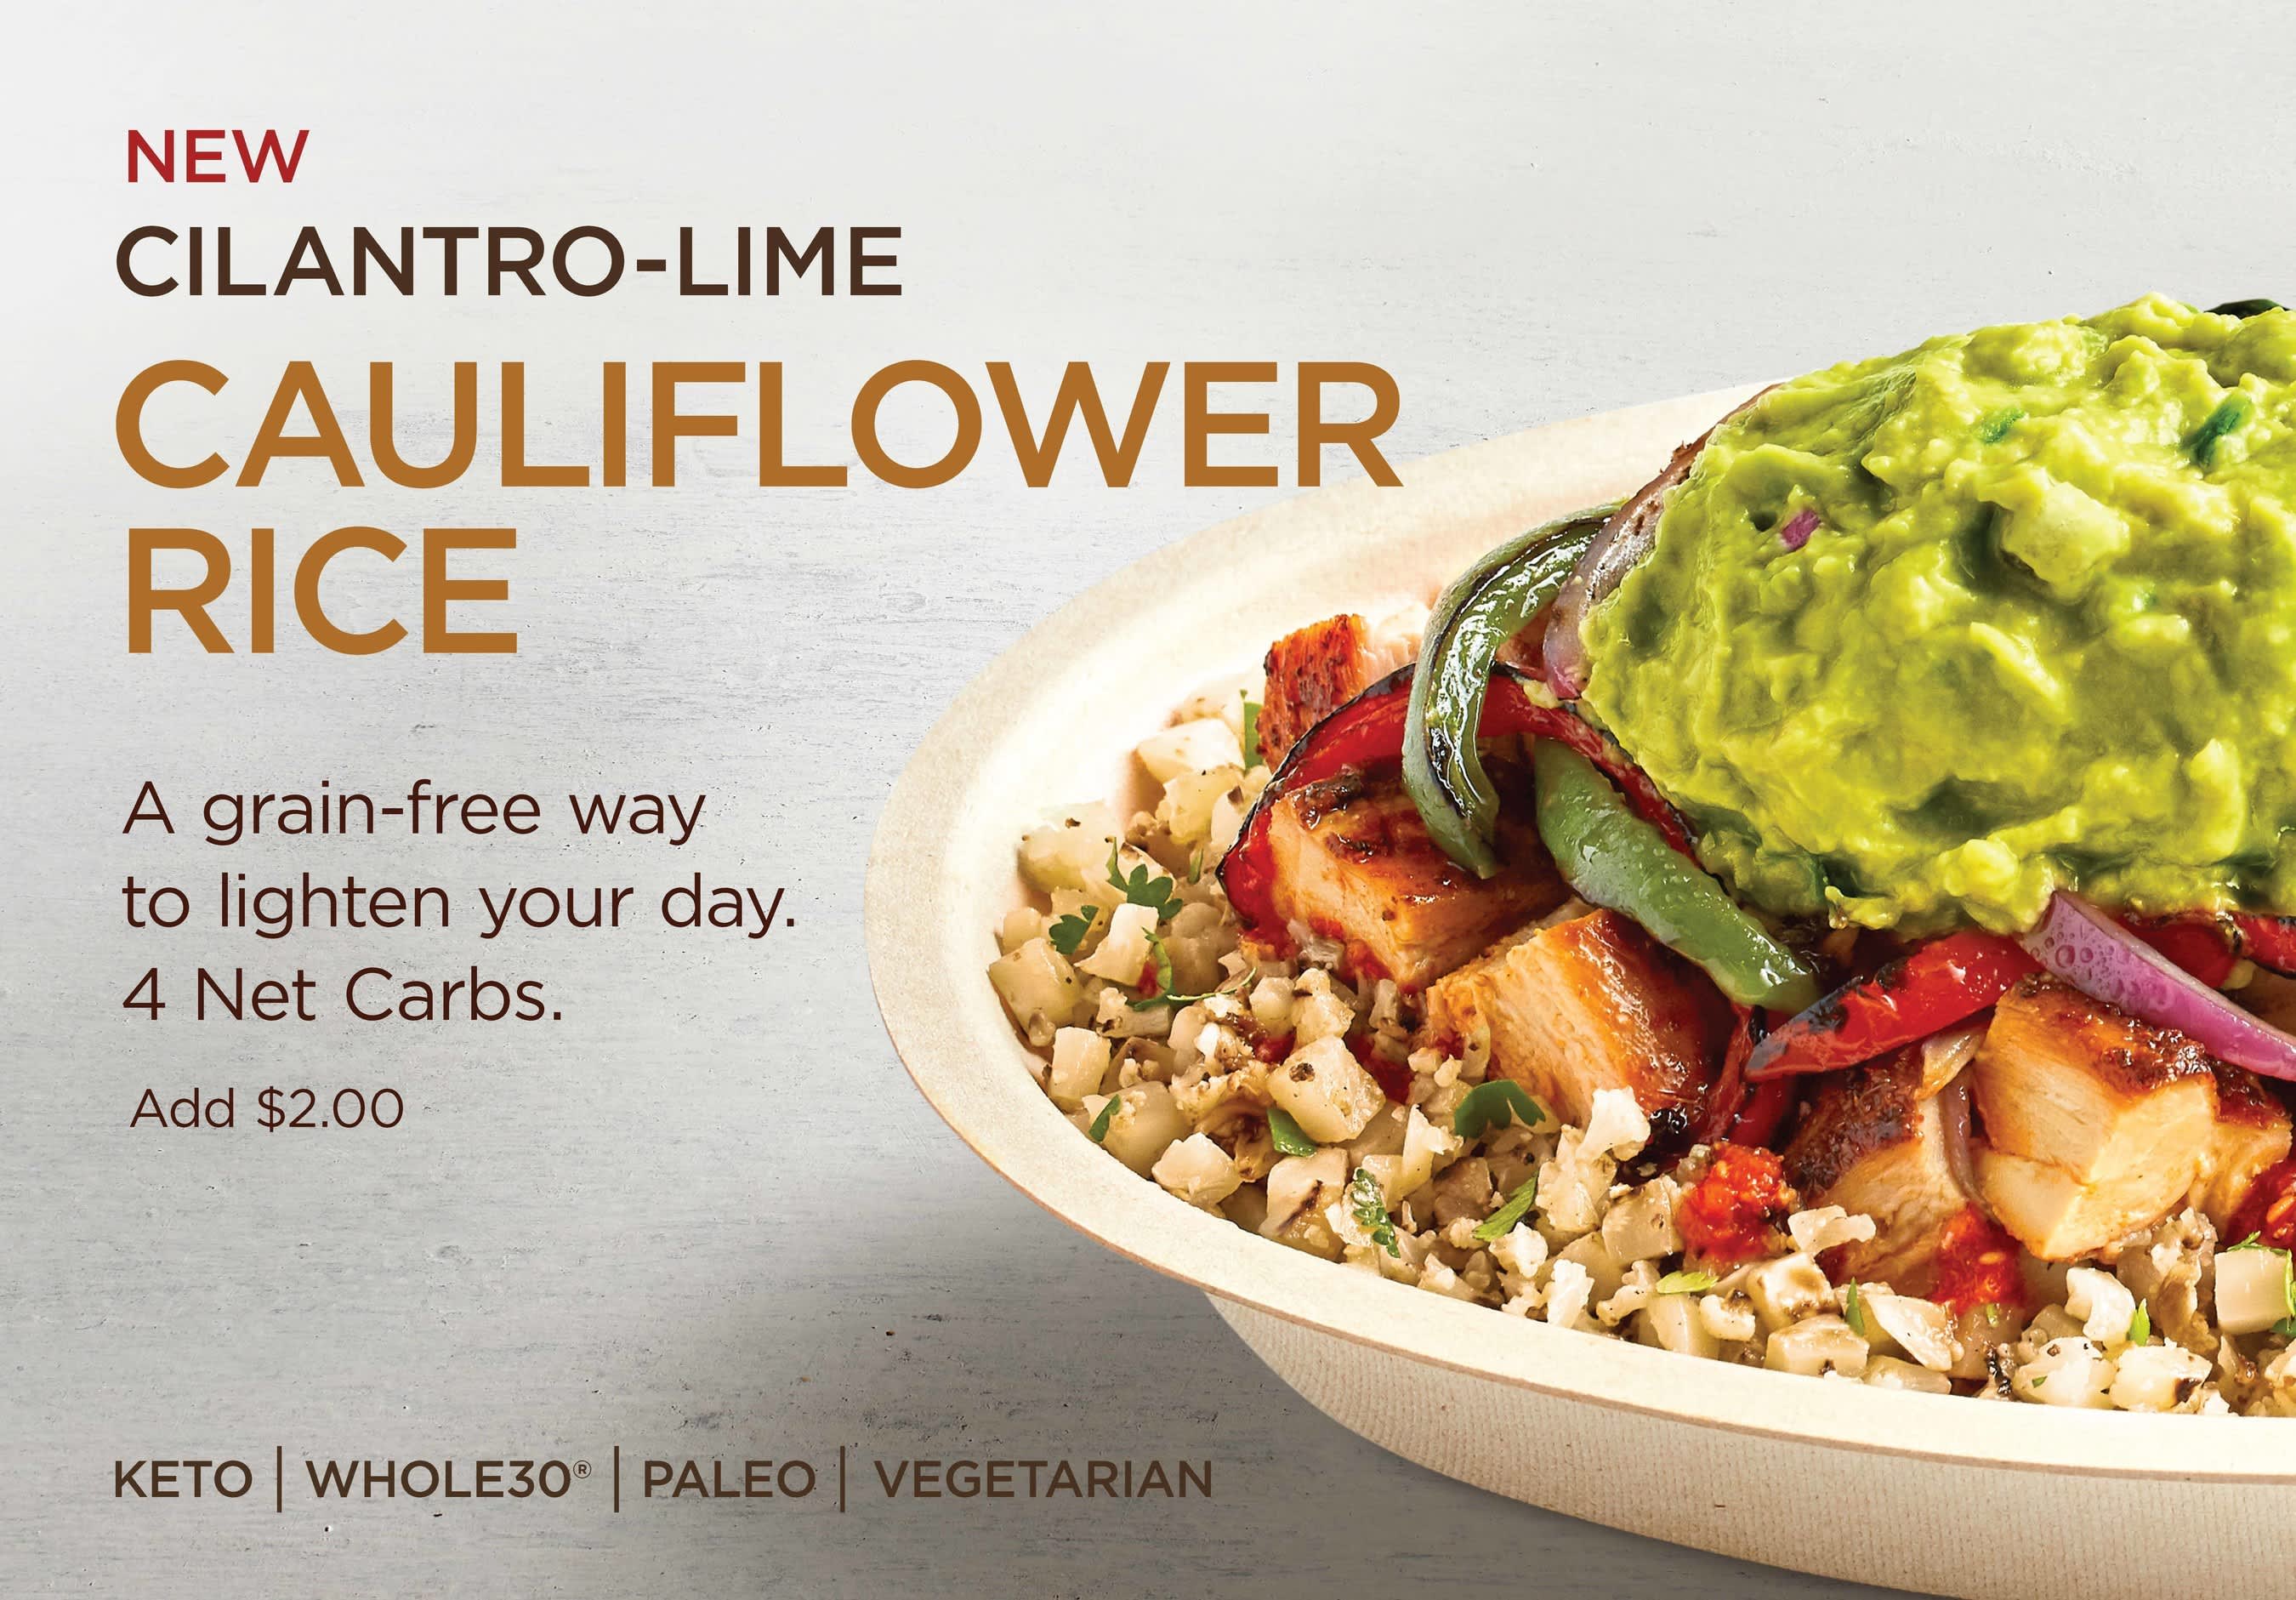 Chipotle launches cauliflower rice nationwide as consumers cut grains from their diets